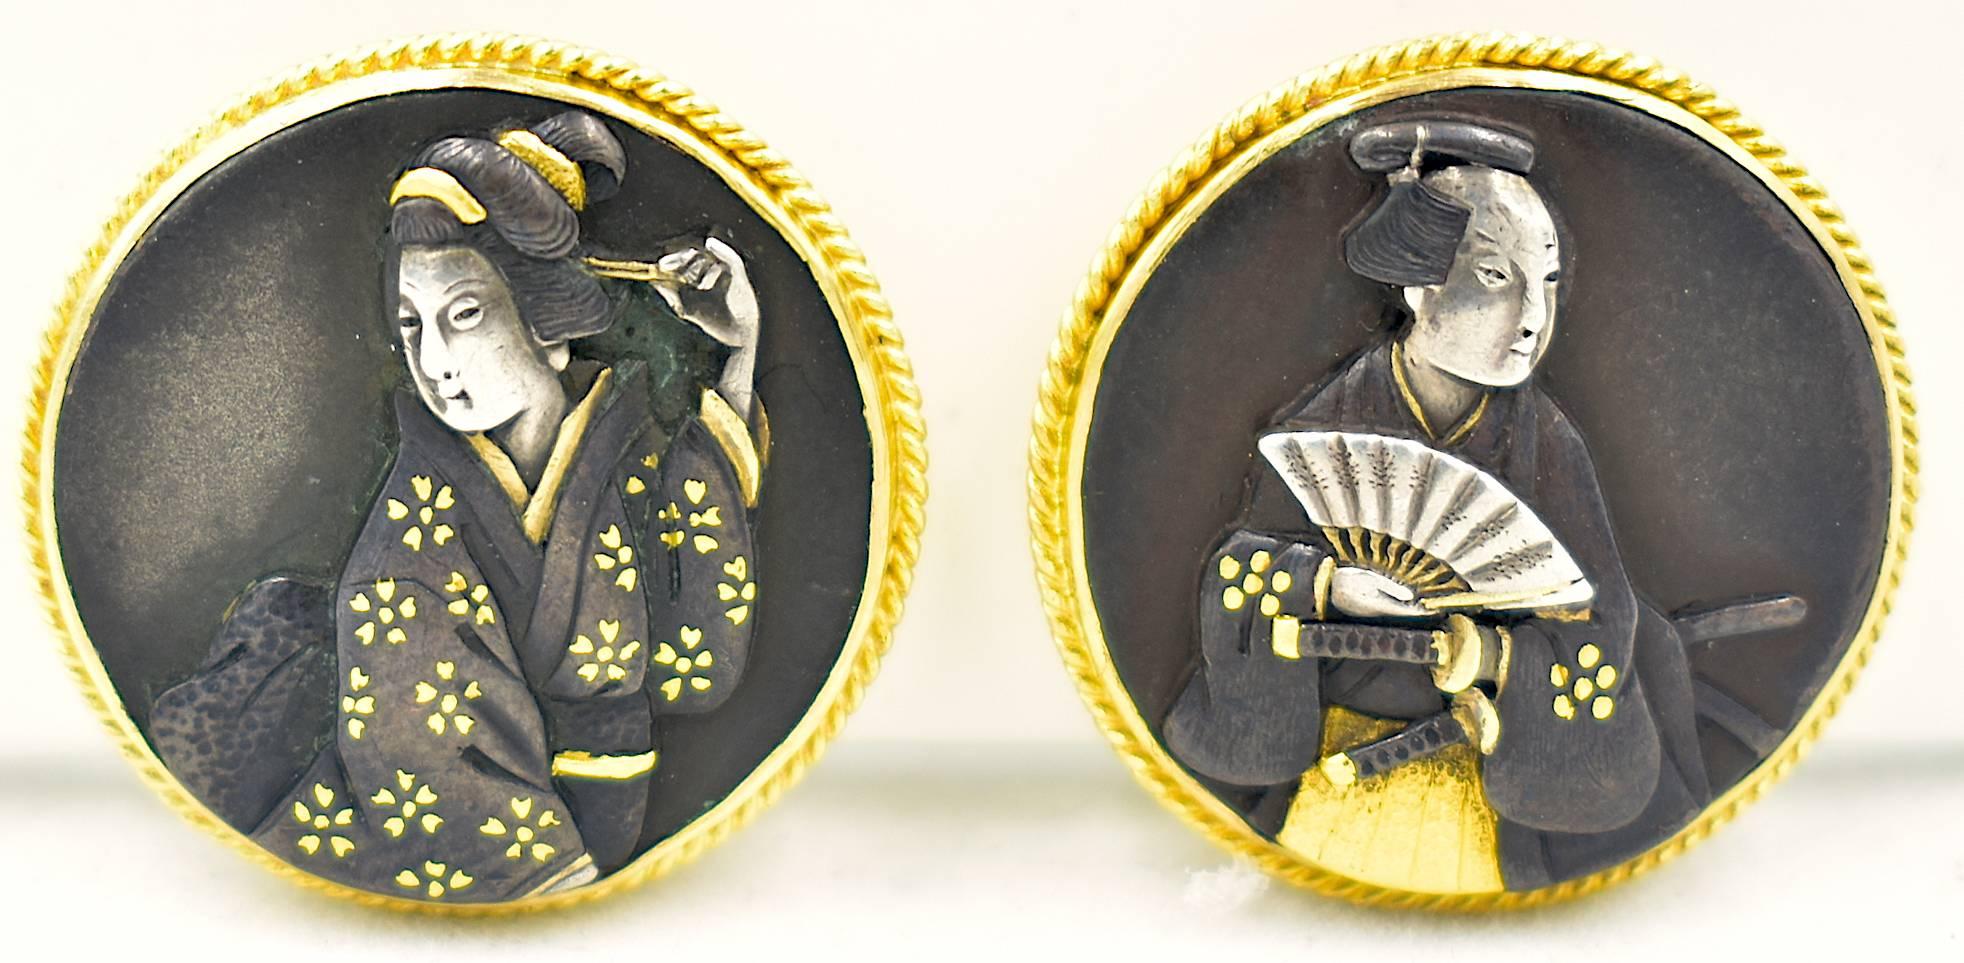 Wonderful early 20th century shakudo earrings each depicting a unique geisha. Shakudo is made of mixed metals, mainly gold and copper which was originally used to make armaments. These easy to wear clip on earrings are perfect for work and play.